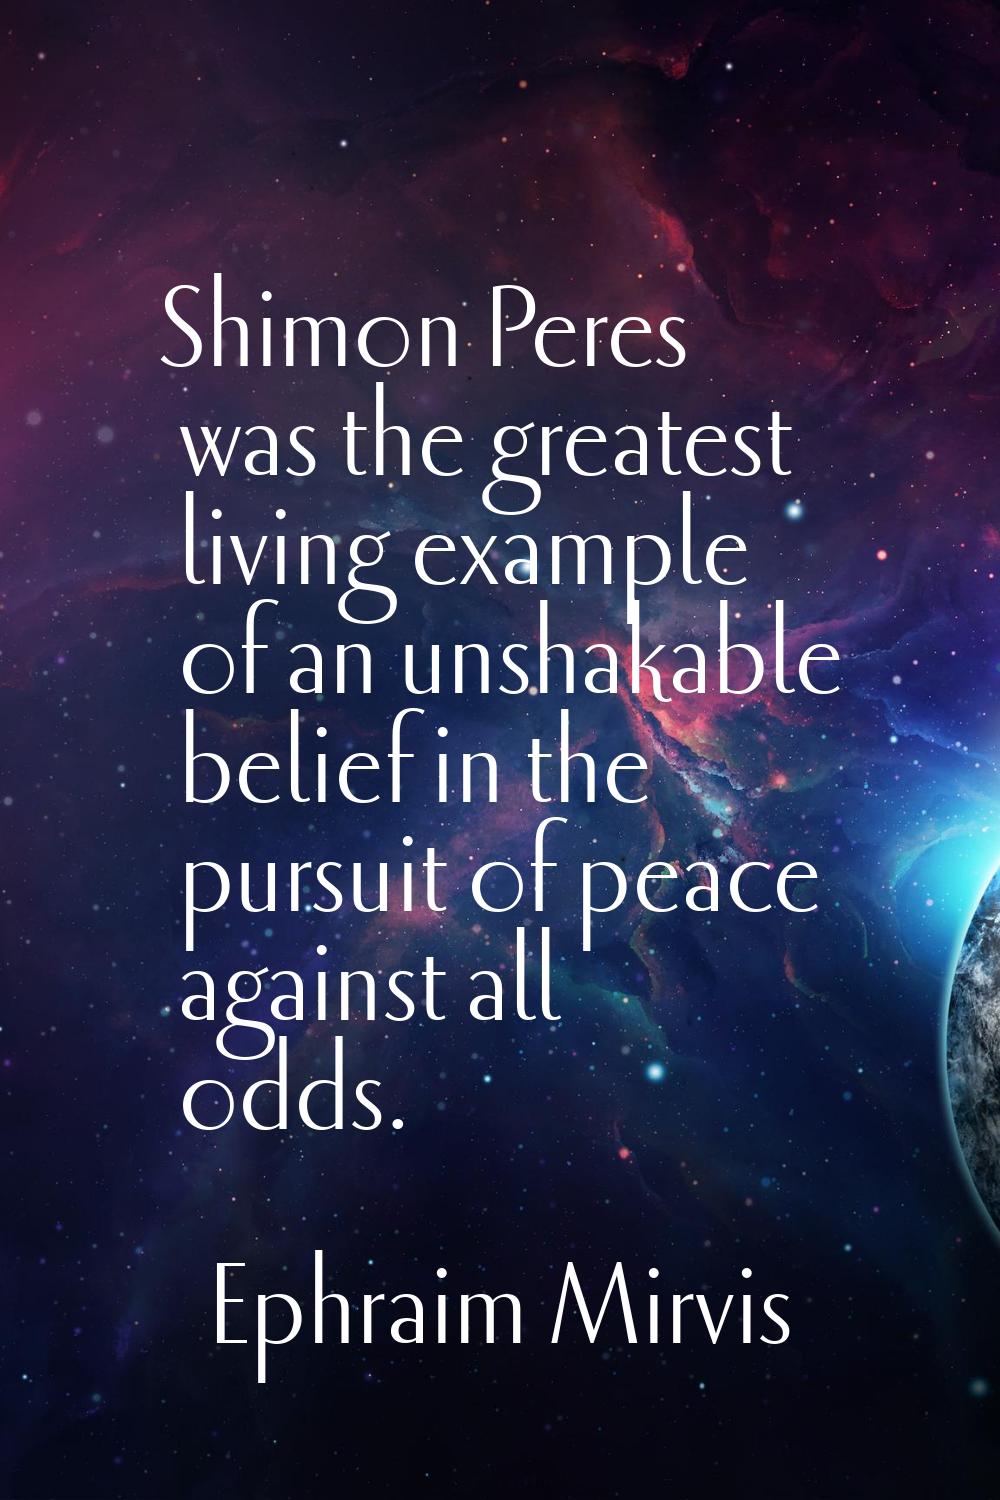 Shimon Peres was the greatest living example of an unshakable belief in the pursuit of peace agains